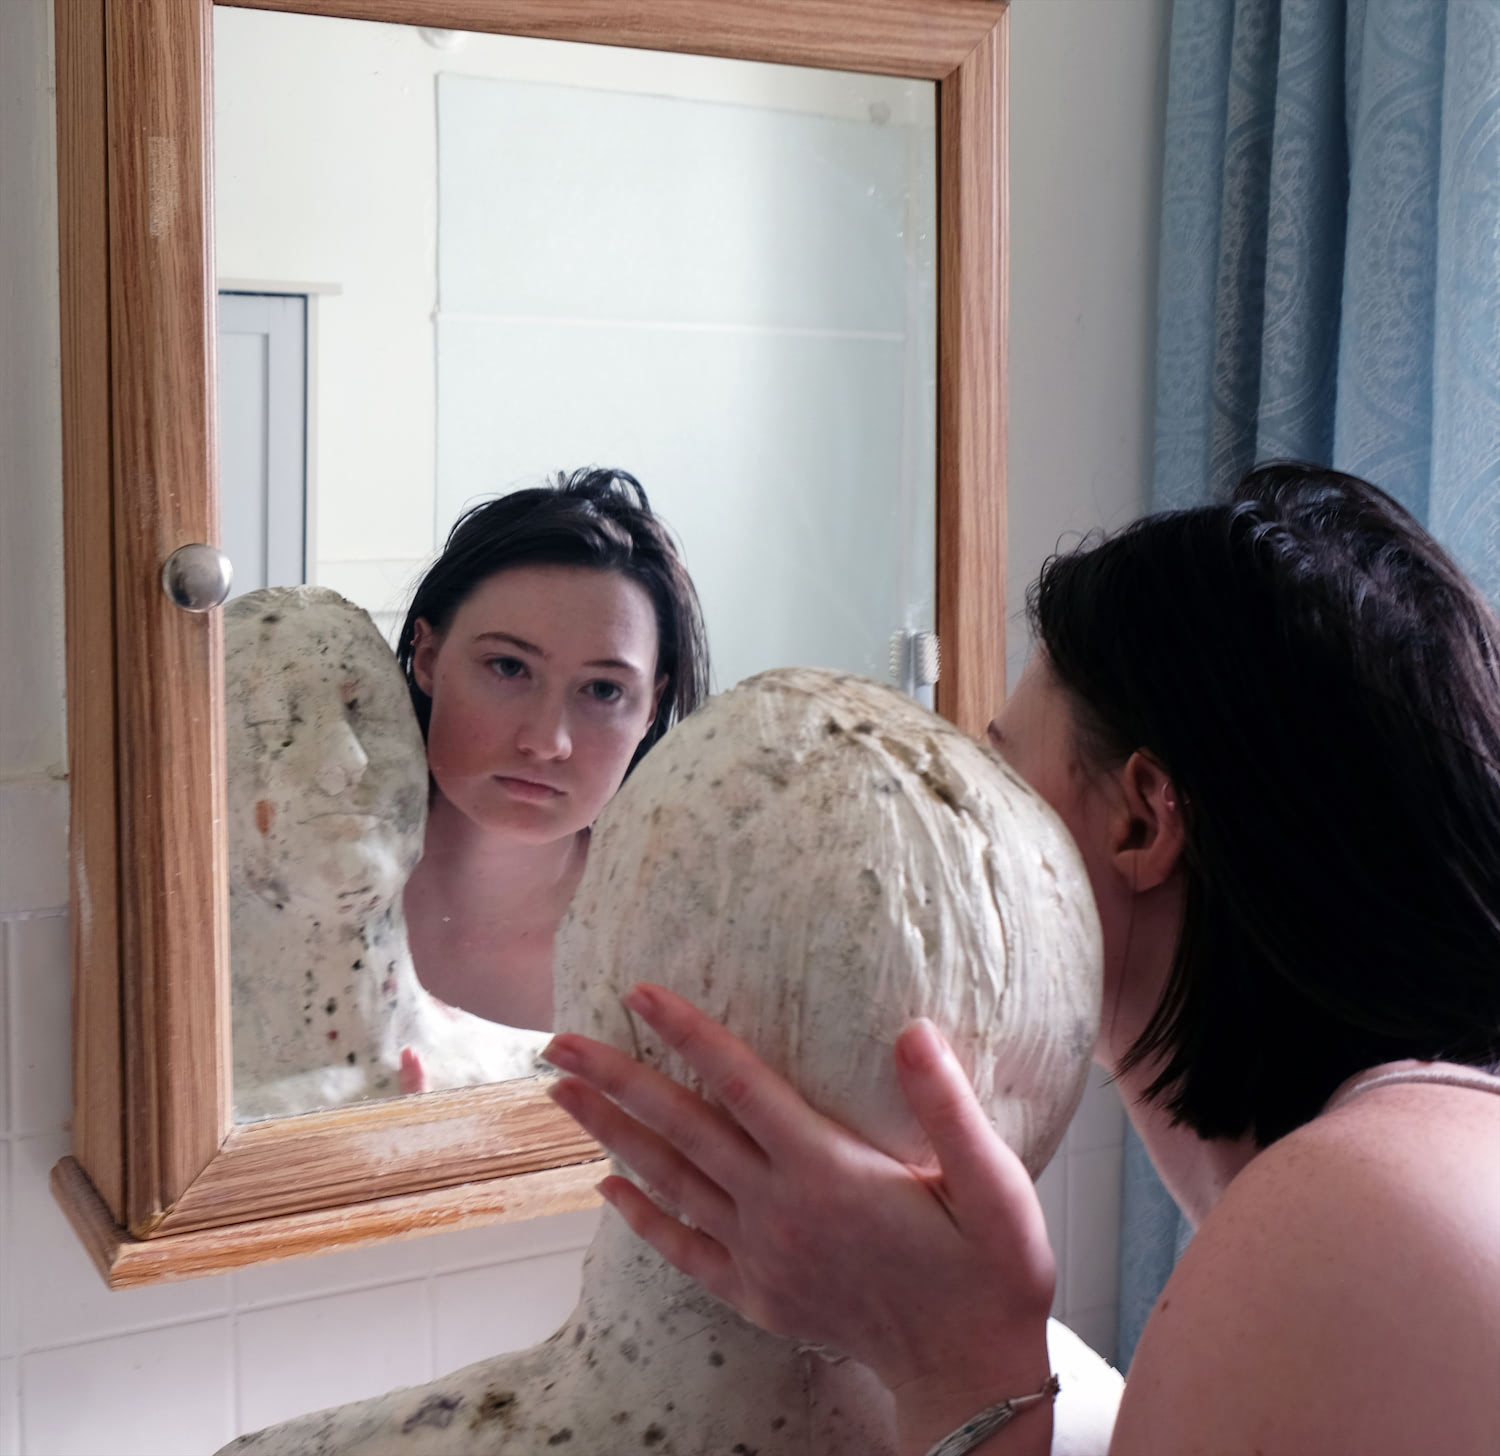 Photo of a woman and a plaster bust covered in bacteria reflected in a mirror.